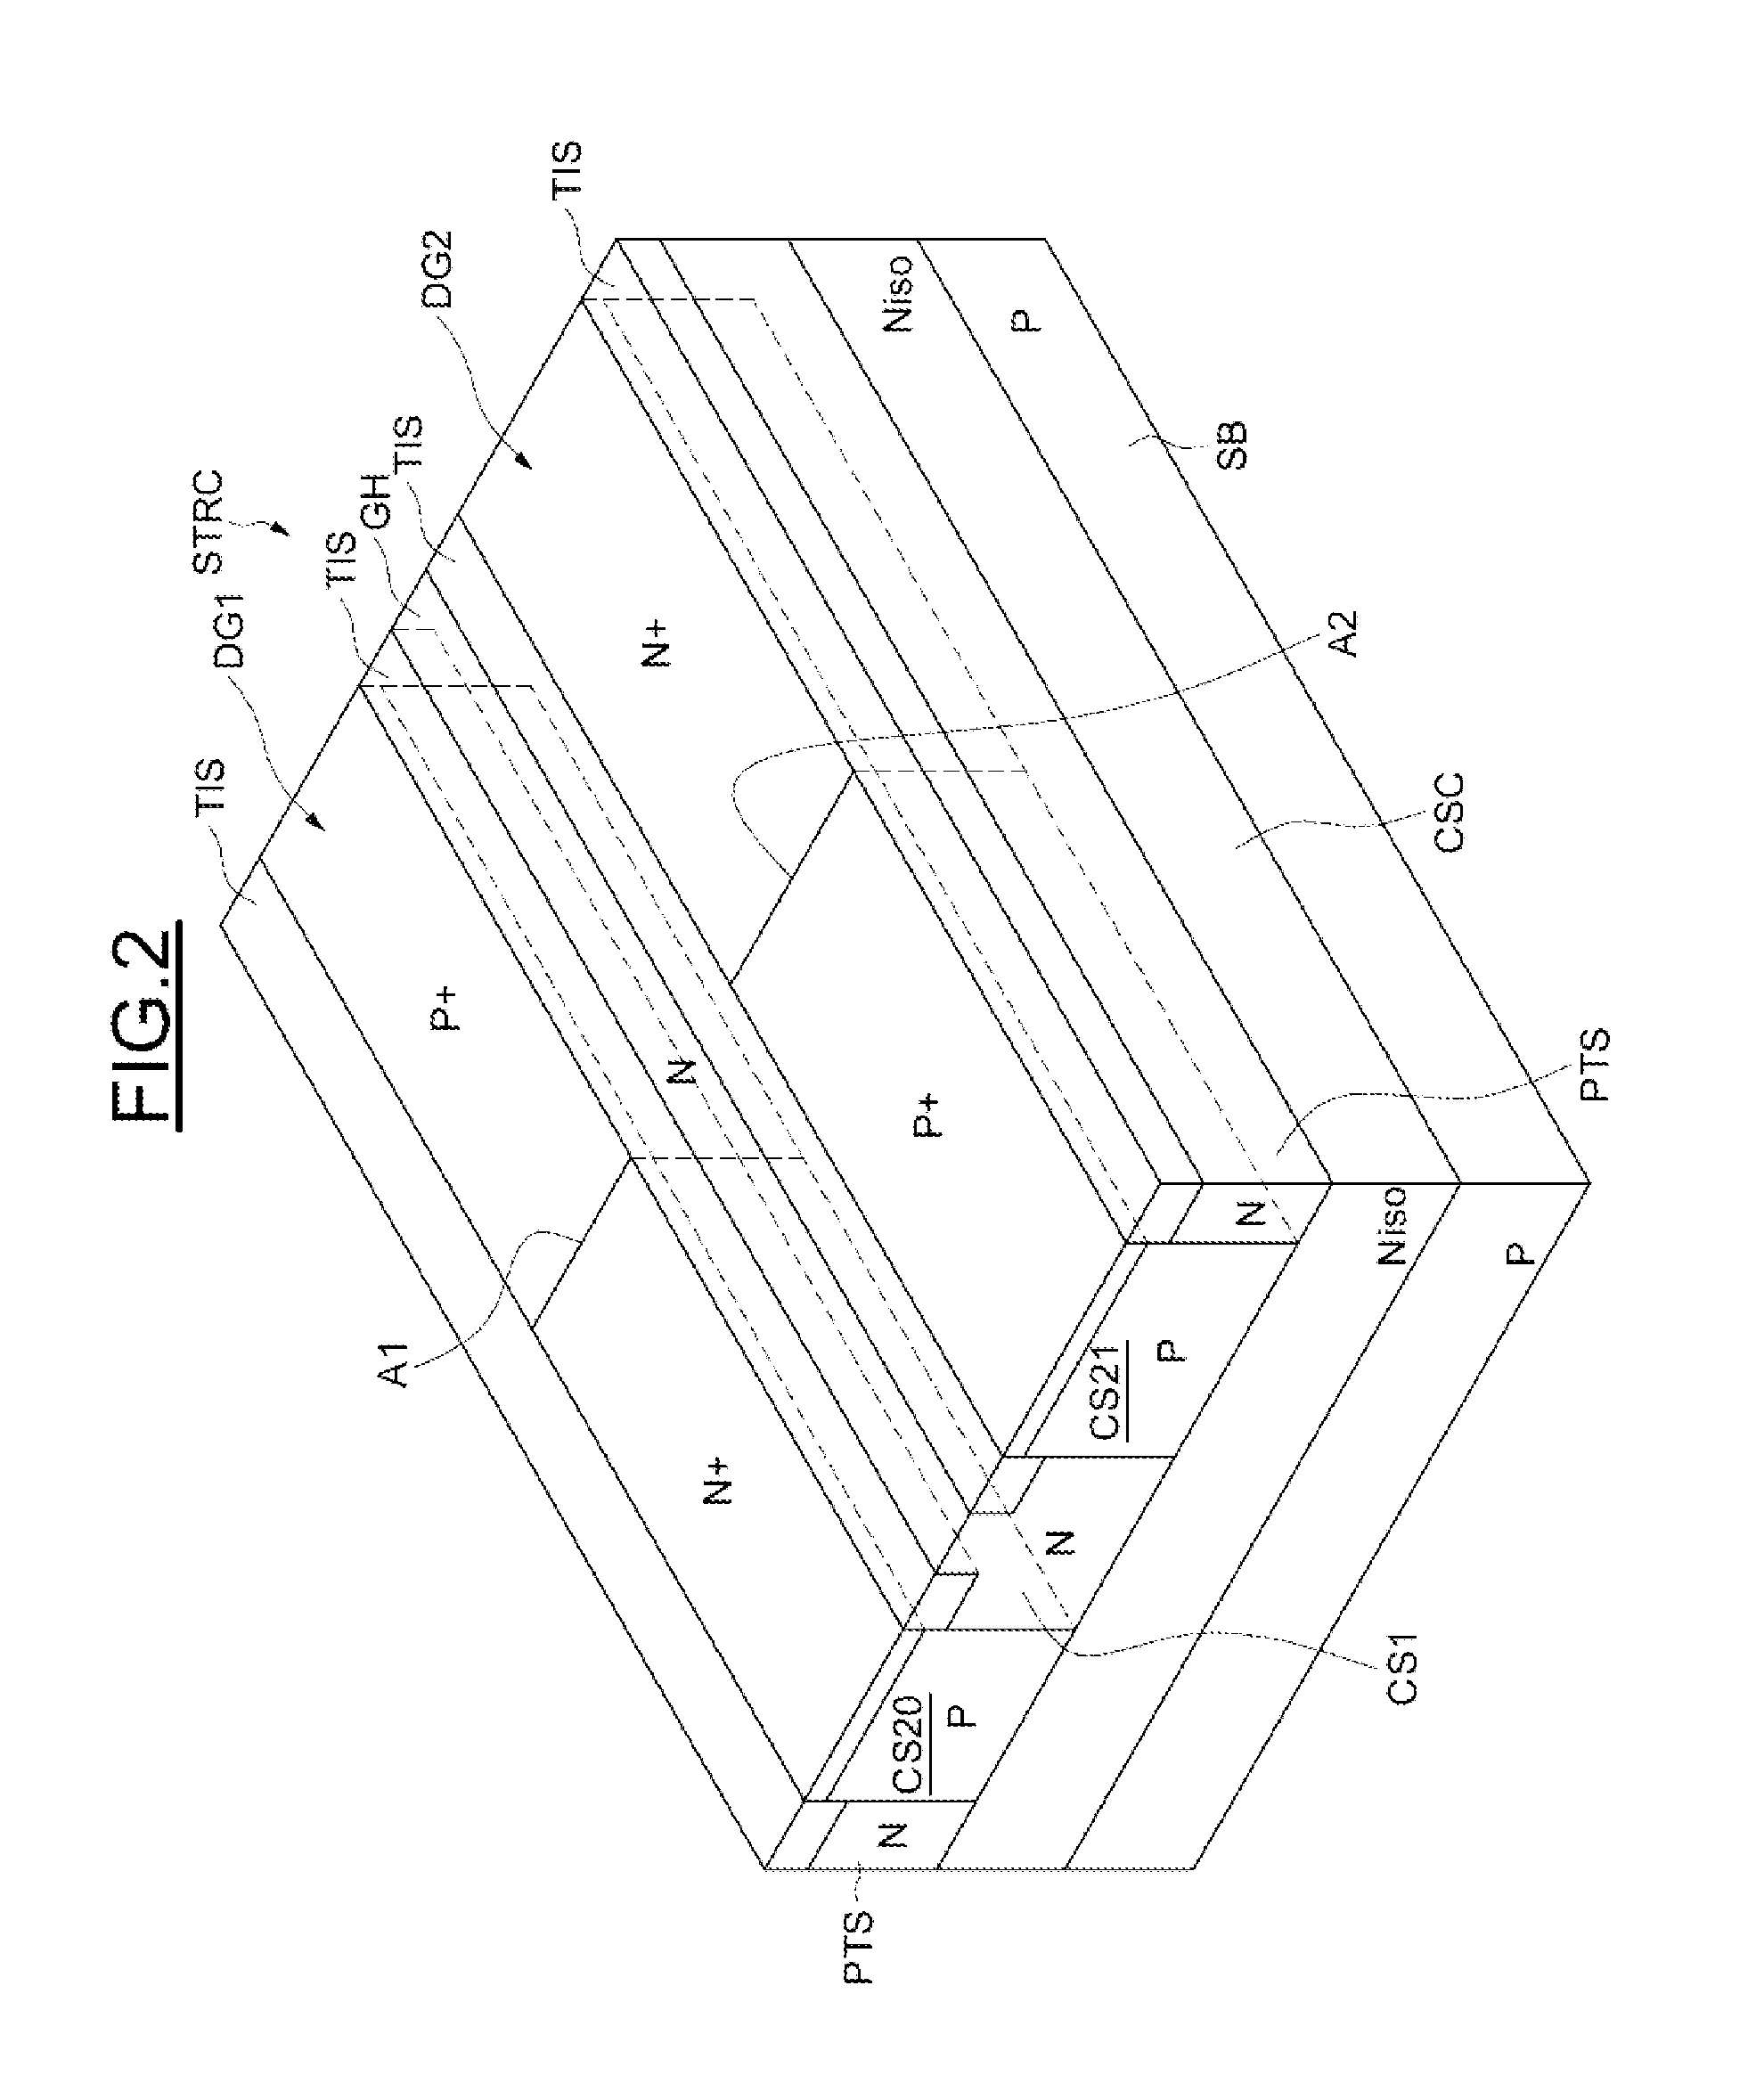 Electronic device for protection against electrostatic discharges, with a concentric structure